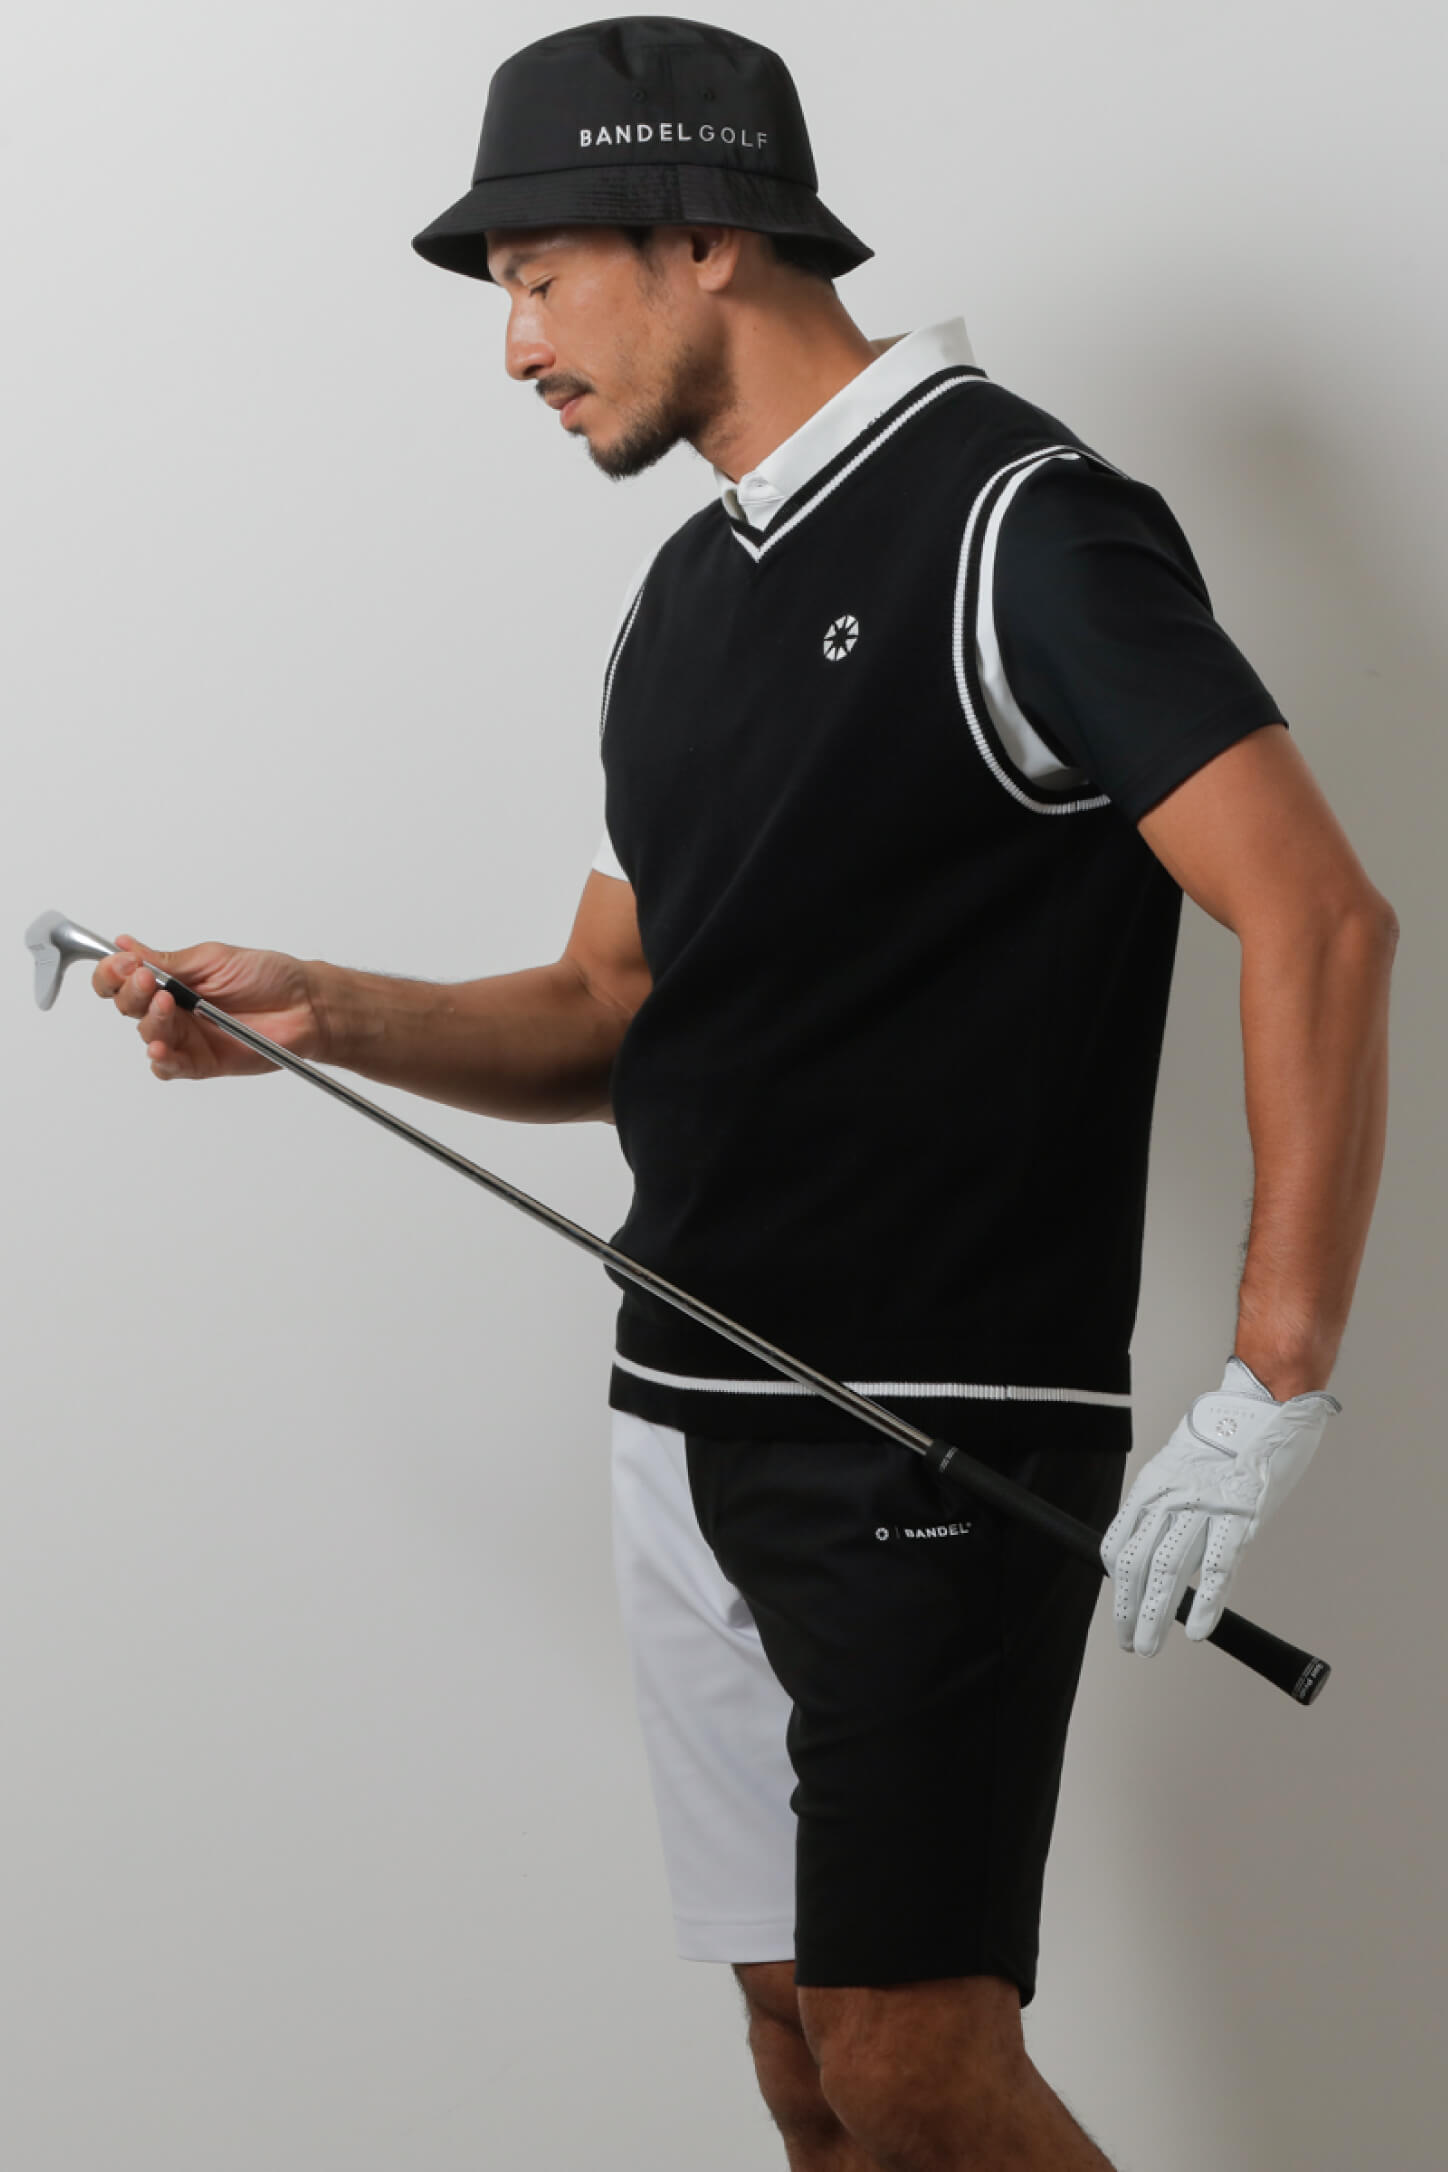 BANDELGOLF 23SS Collection